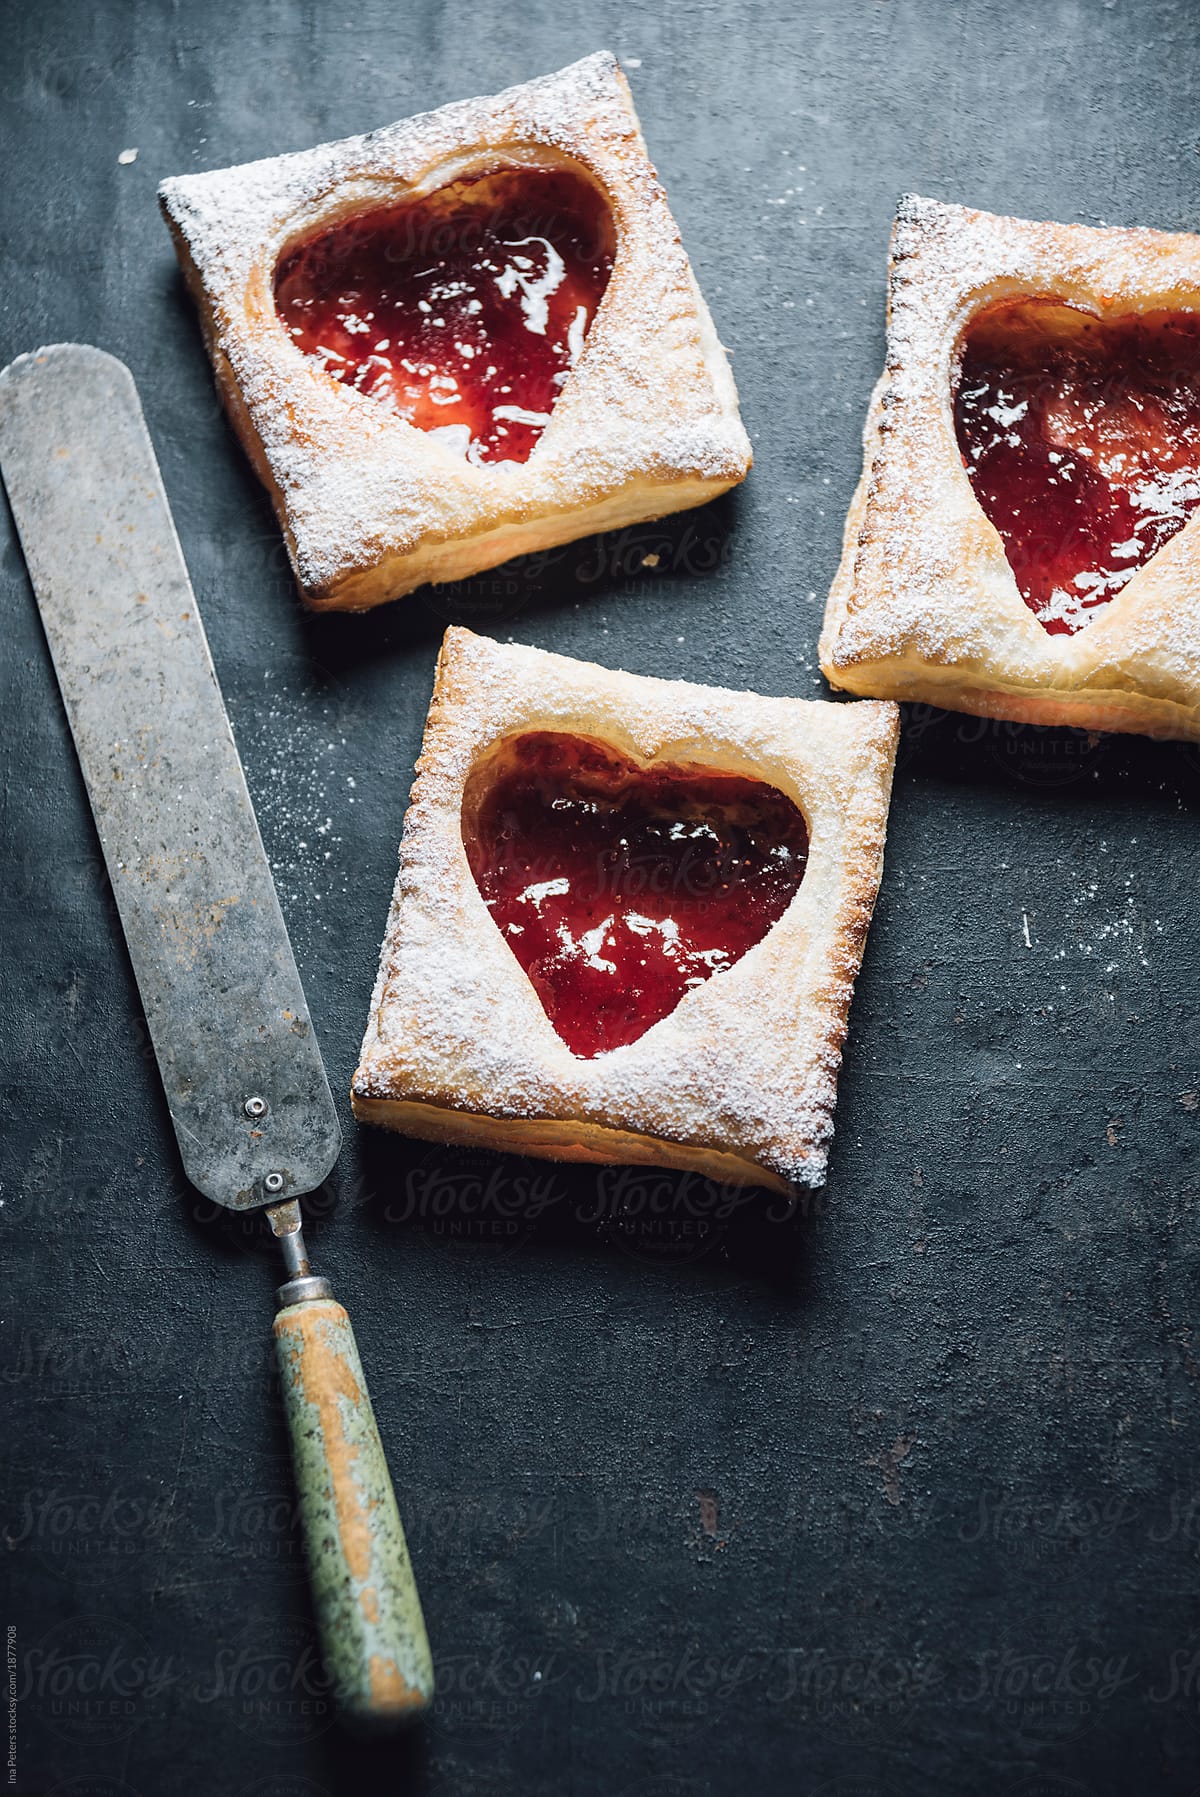 Food: little puff pastry with strawberry jam filling, heart shap